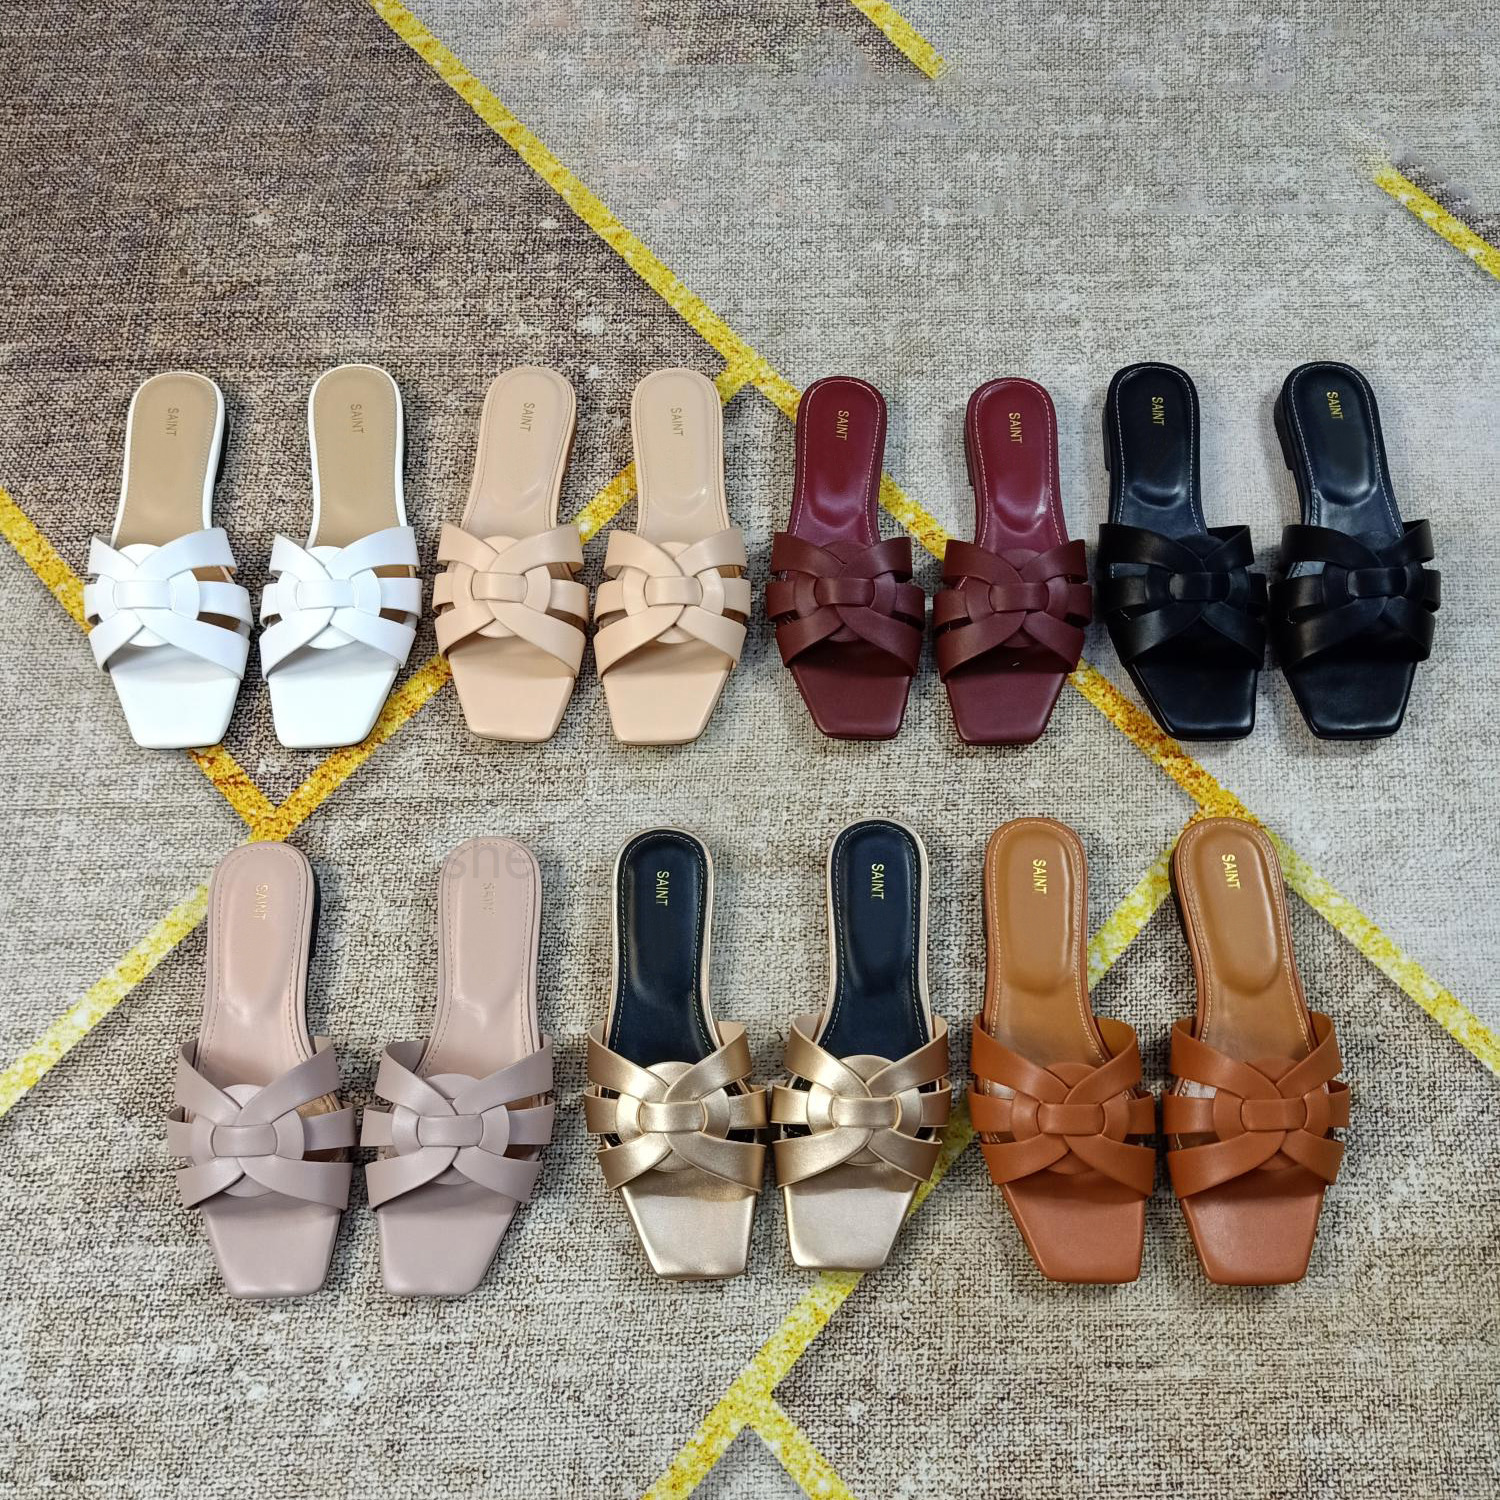 

Top YS slippers Tribute Flat Leather interwining straps Slide sandals women shoes Dark Grey Rose Pink Patent Amber Nappa Leather Ivory Croc, 15 burgundy croc embossed